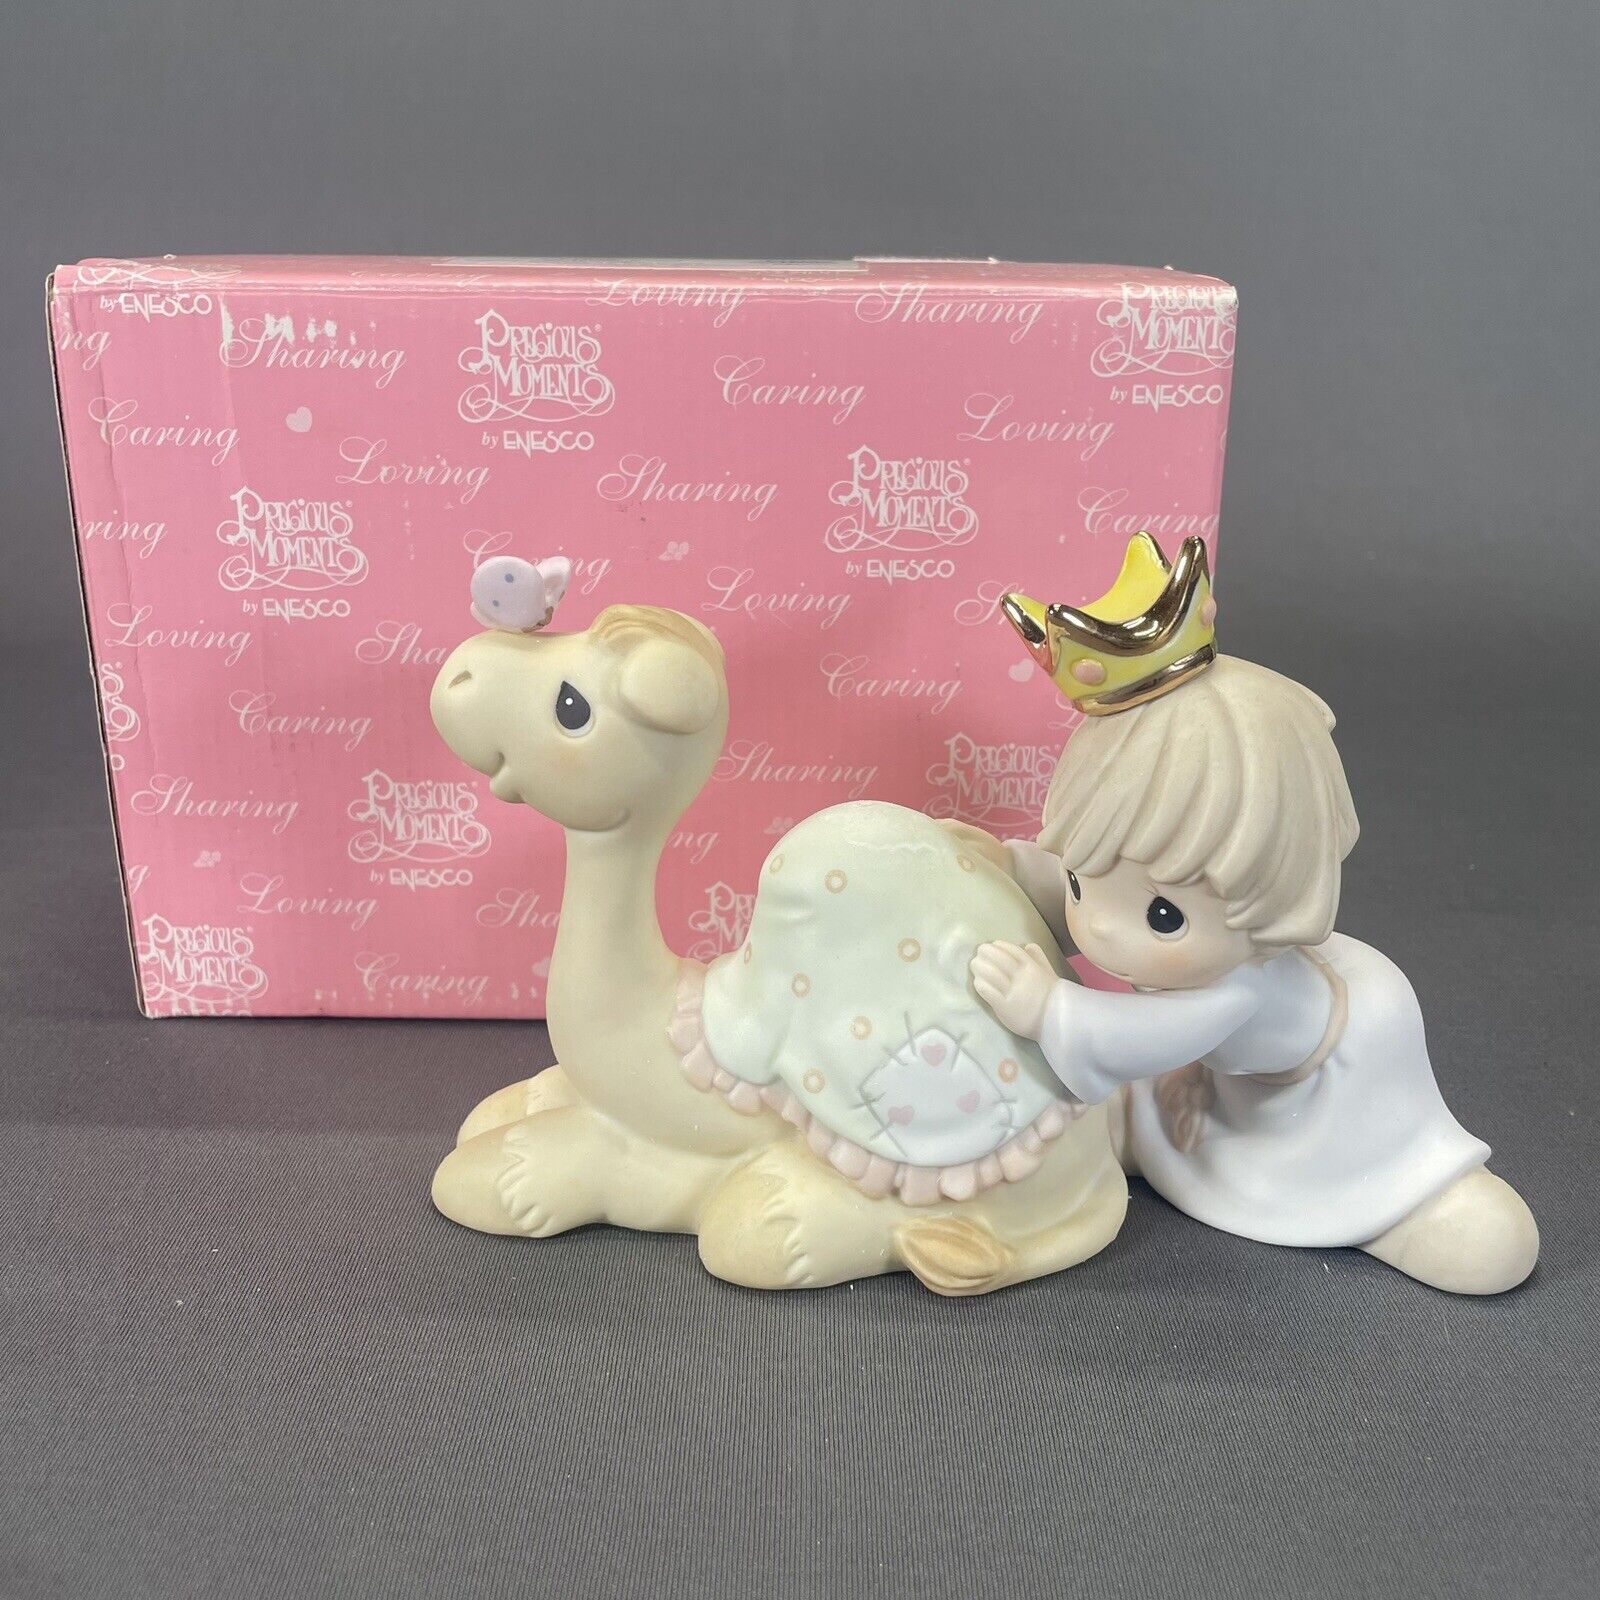 Precious Moments Enesco 2001 The Royal Budge is Good for the Soul #878987